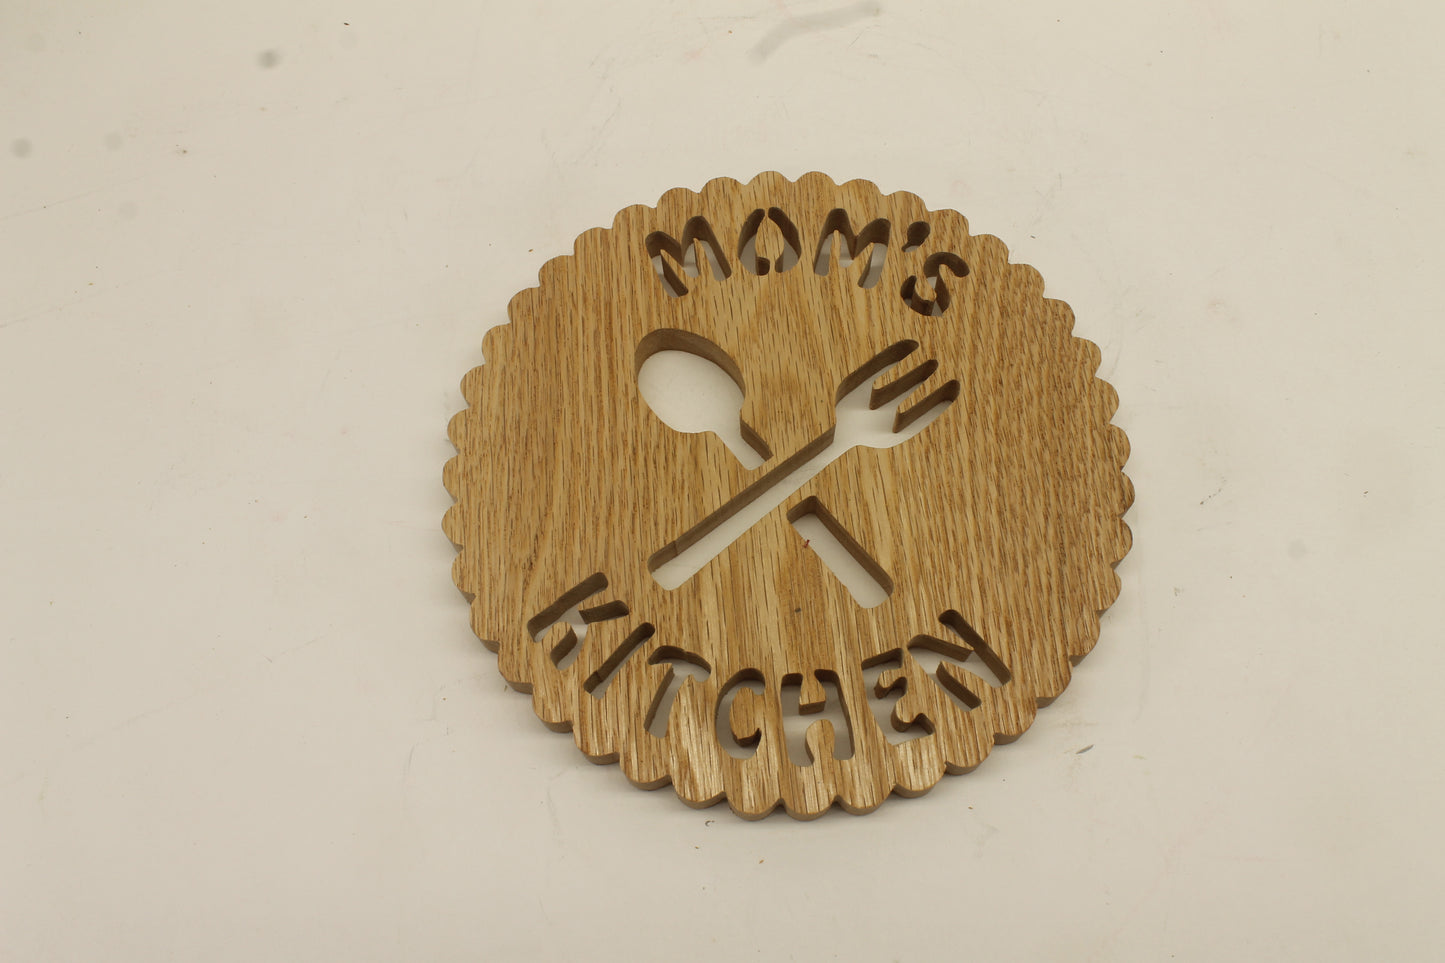 Mom's Kitchen trivet handcrafted from red oak